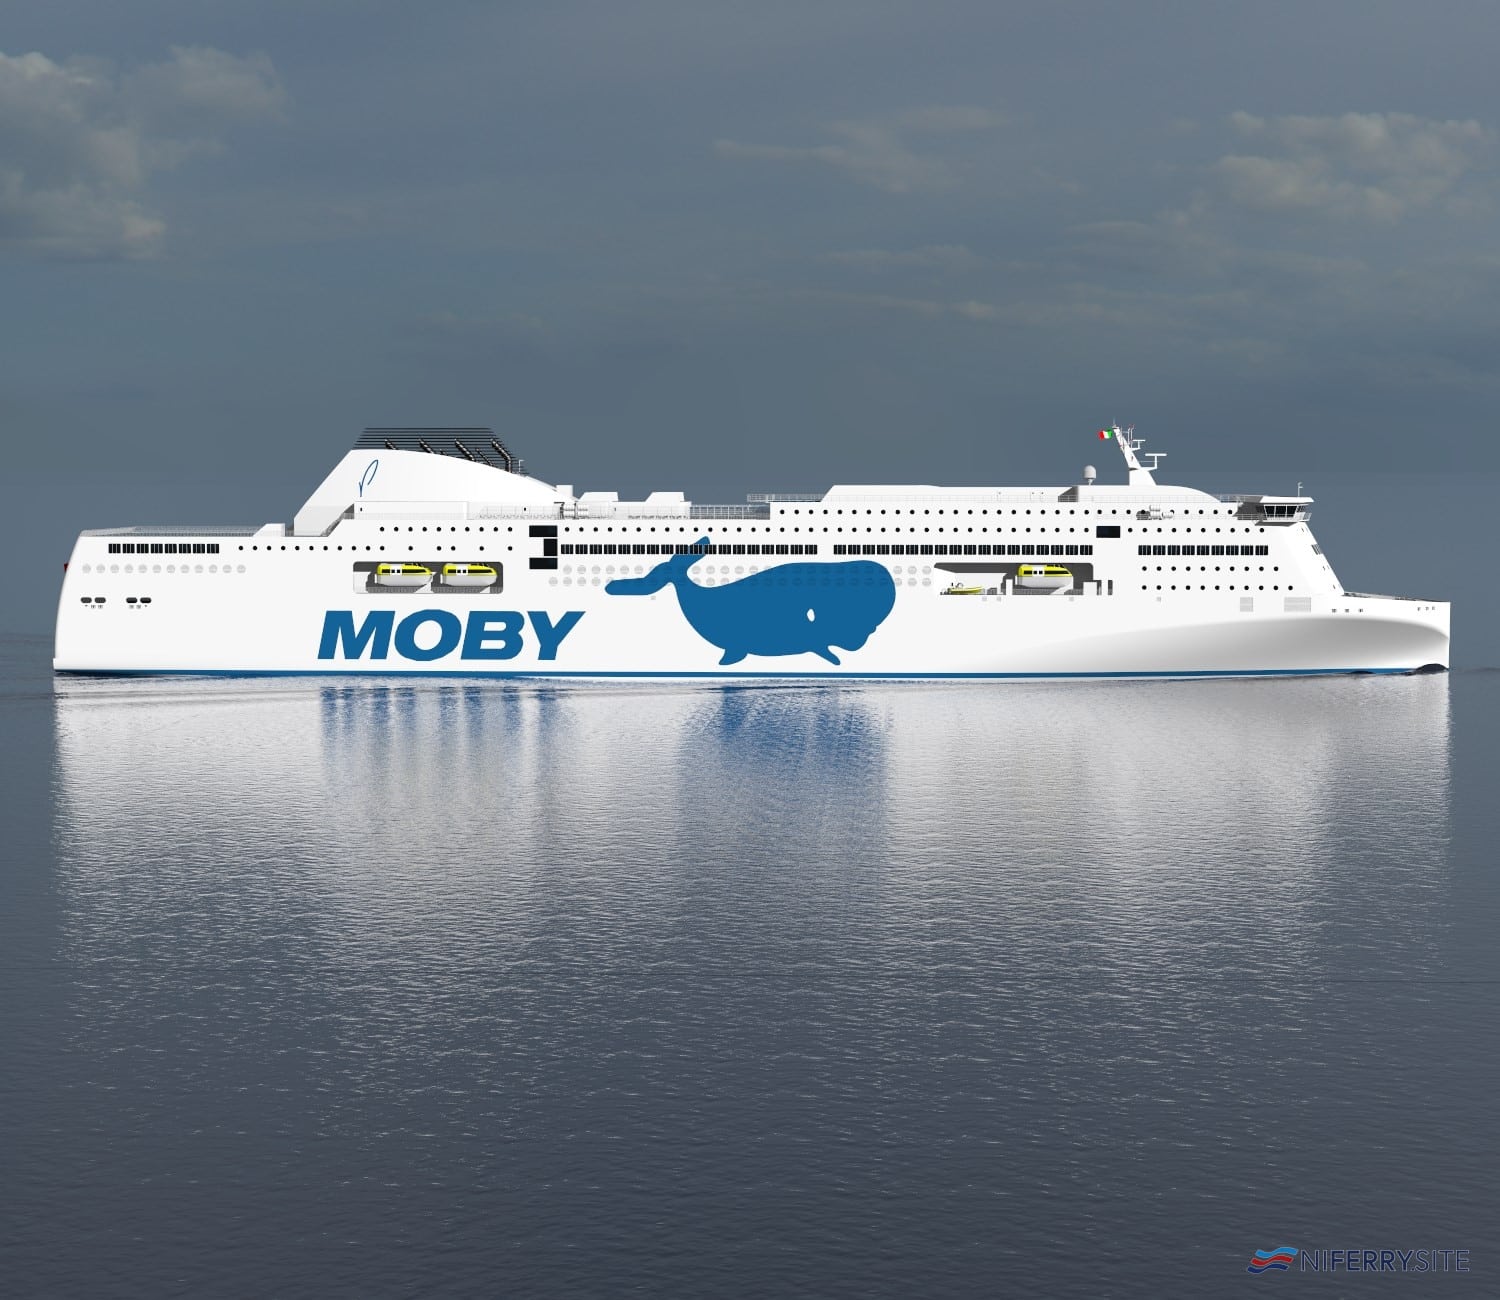 A render of the first of Moby Line's giant Ro-Pax's on order at Guangzhou Shipyard International, to be named MOBY FANTASY